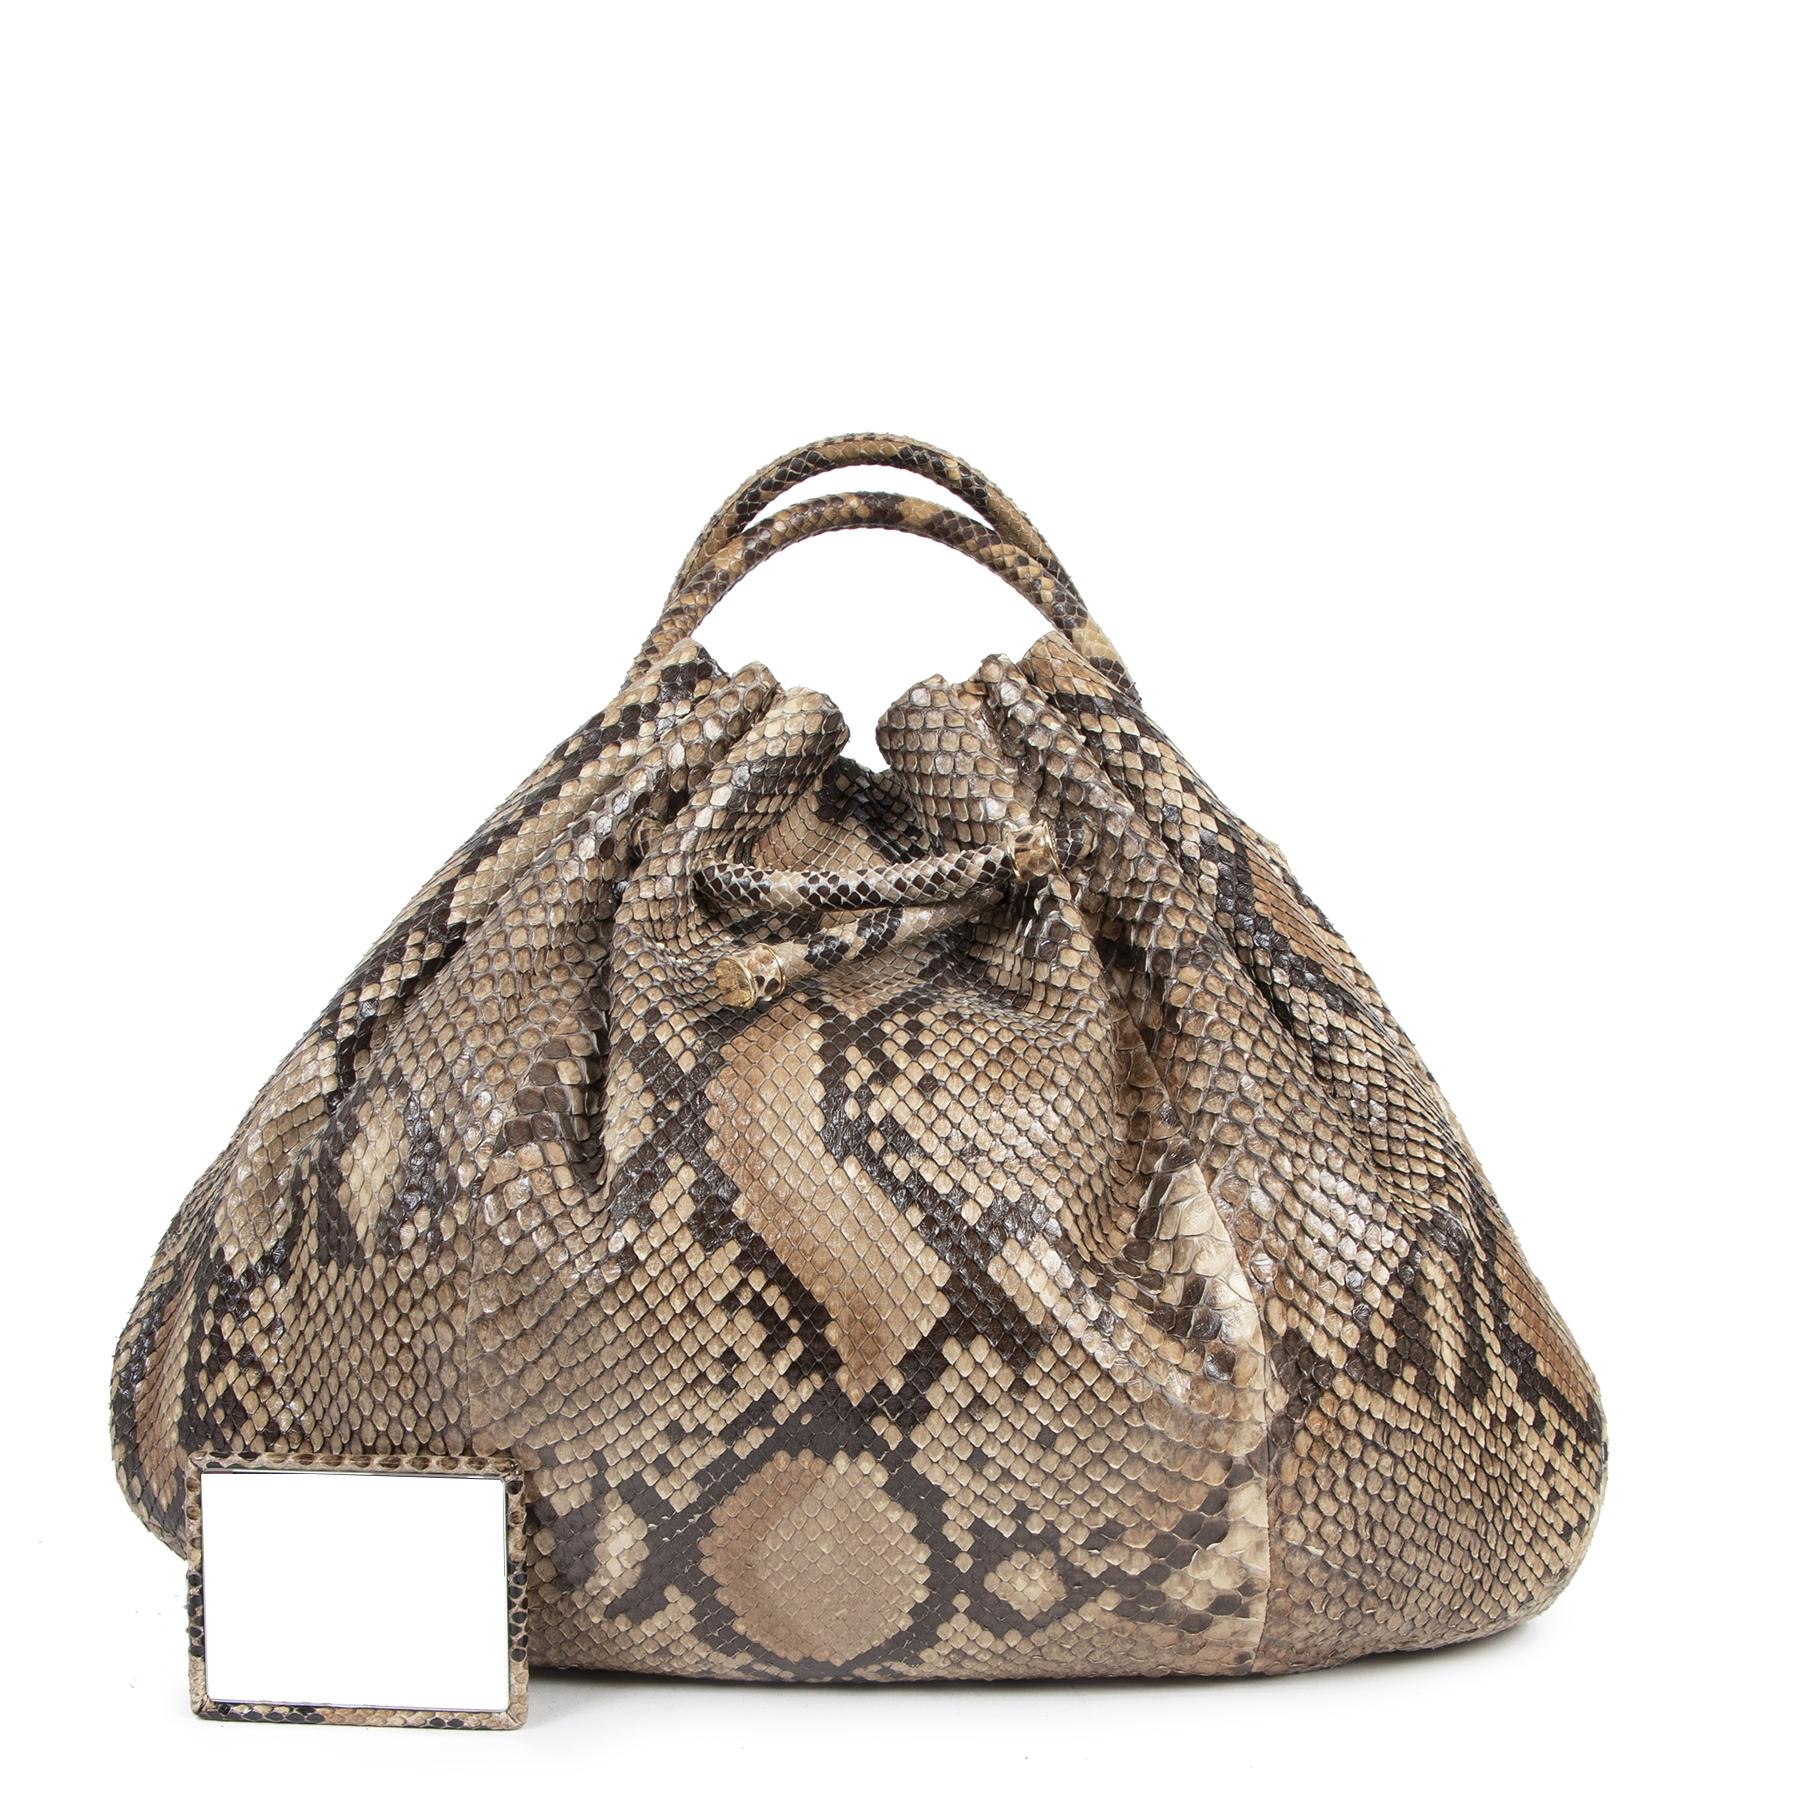 Very good condition

Bottega Veneta Large Python Hobo Bag

The hobo bag has returned from the past and is here to stay! This gorgeous Bottega Veneta bag is the perfect piece to join the trend and comes in a print that's just as stylish. The bag is